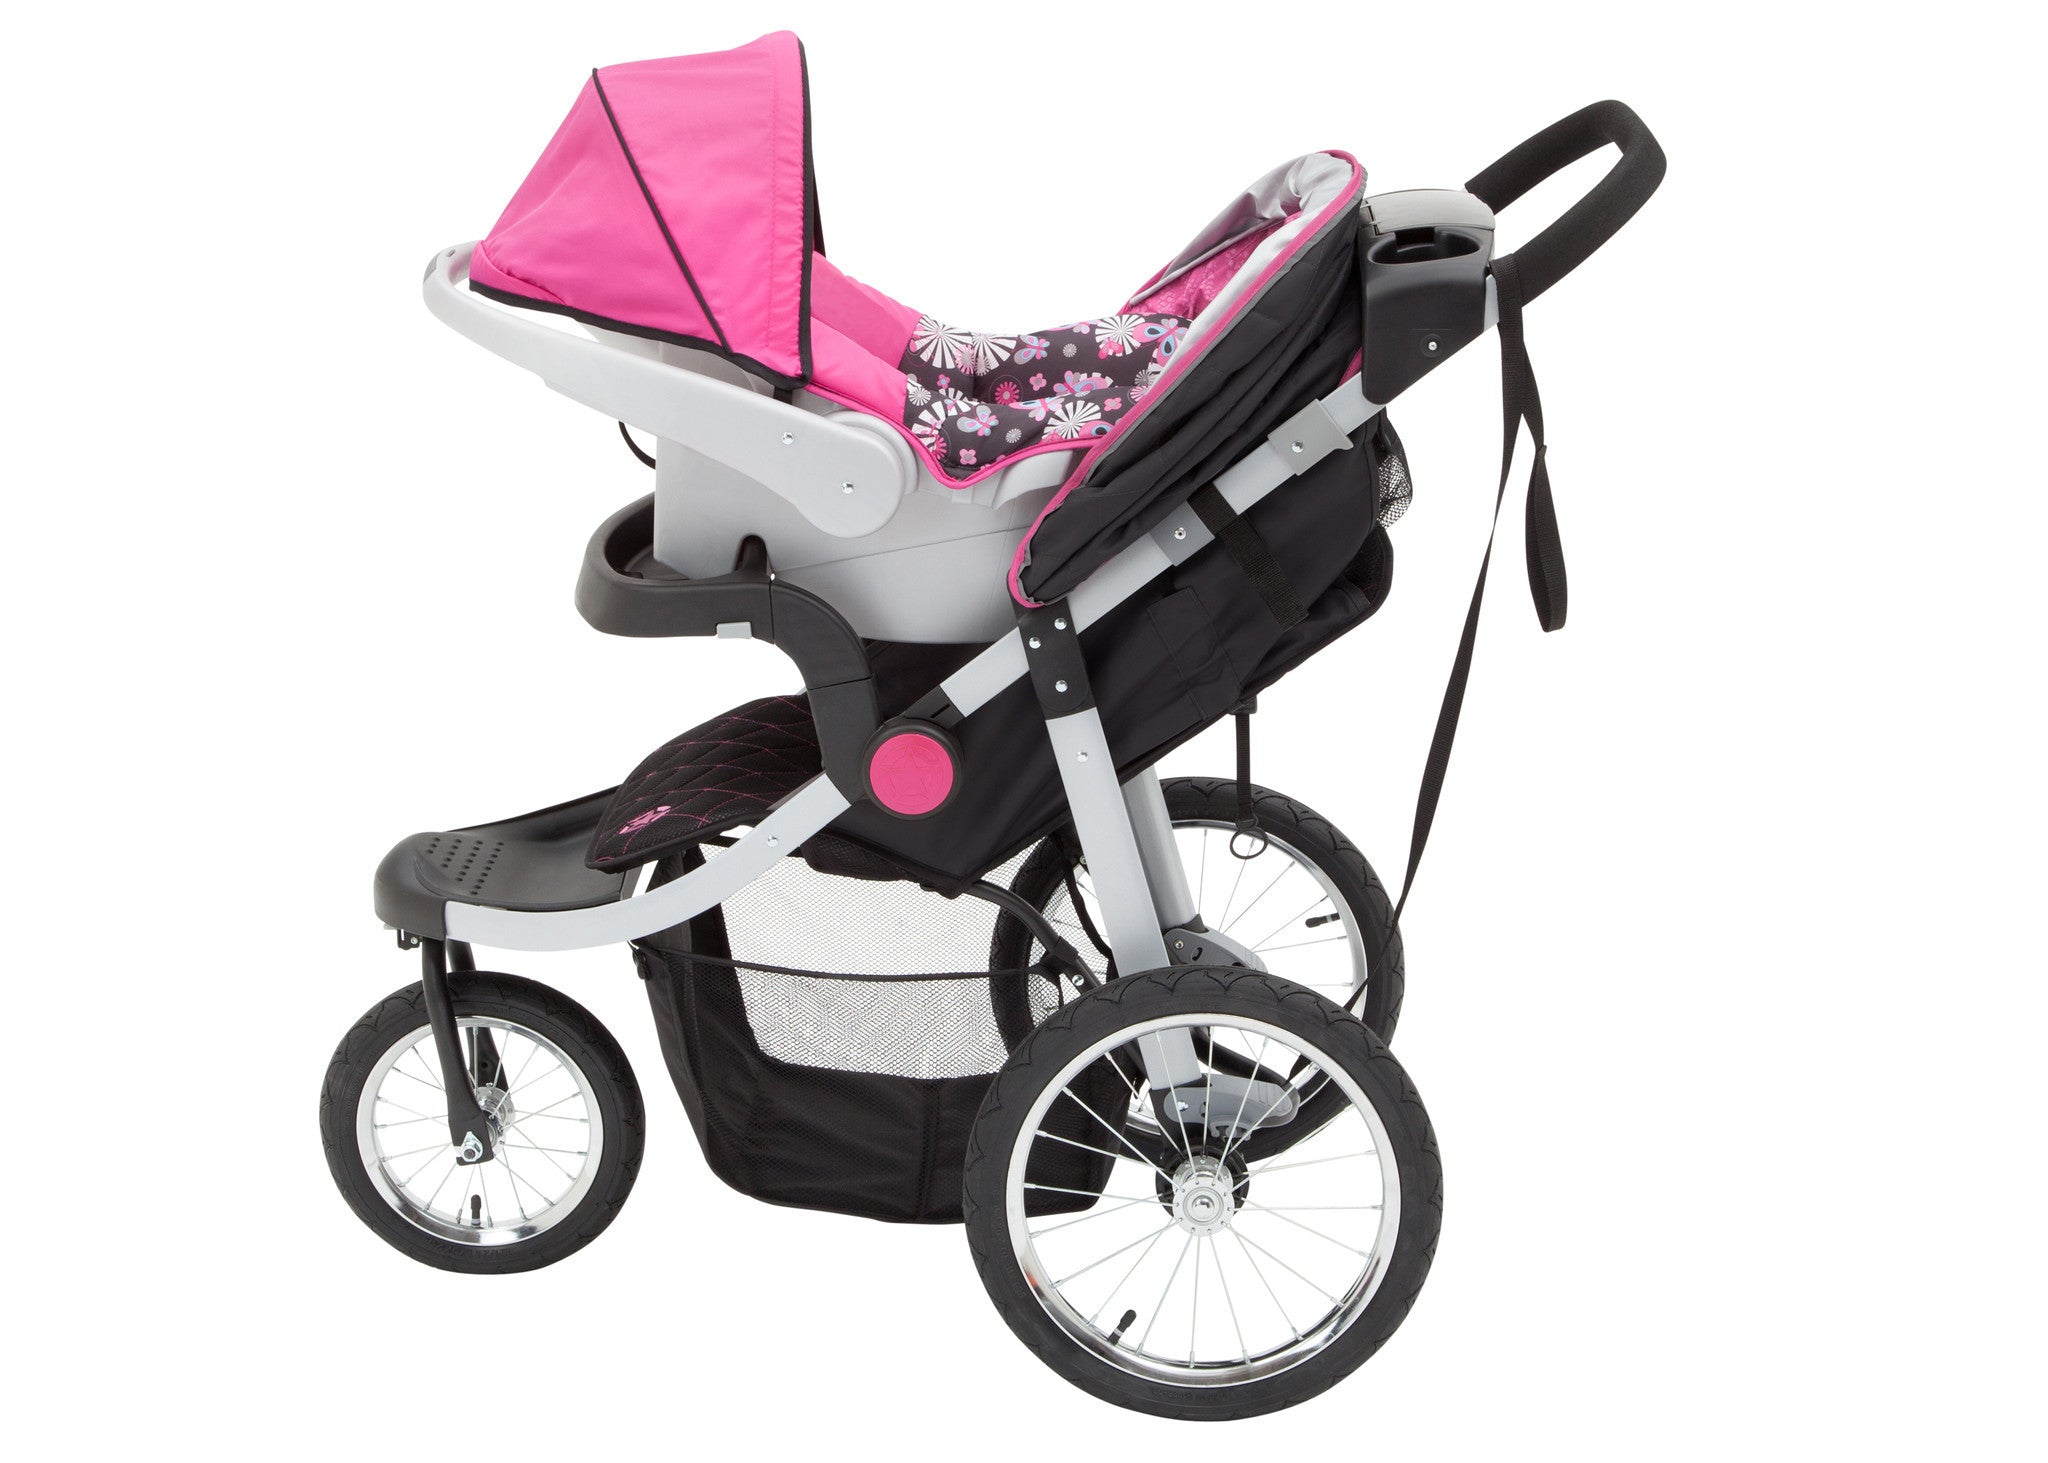 jeep cross country all terrain stroller